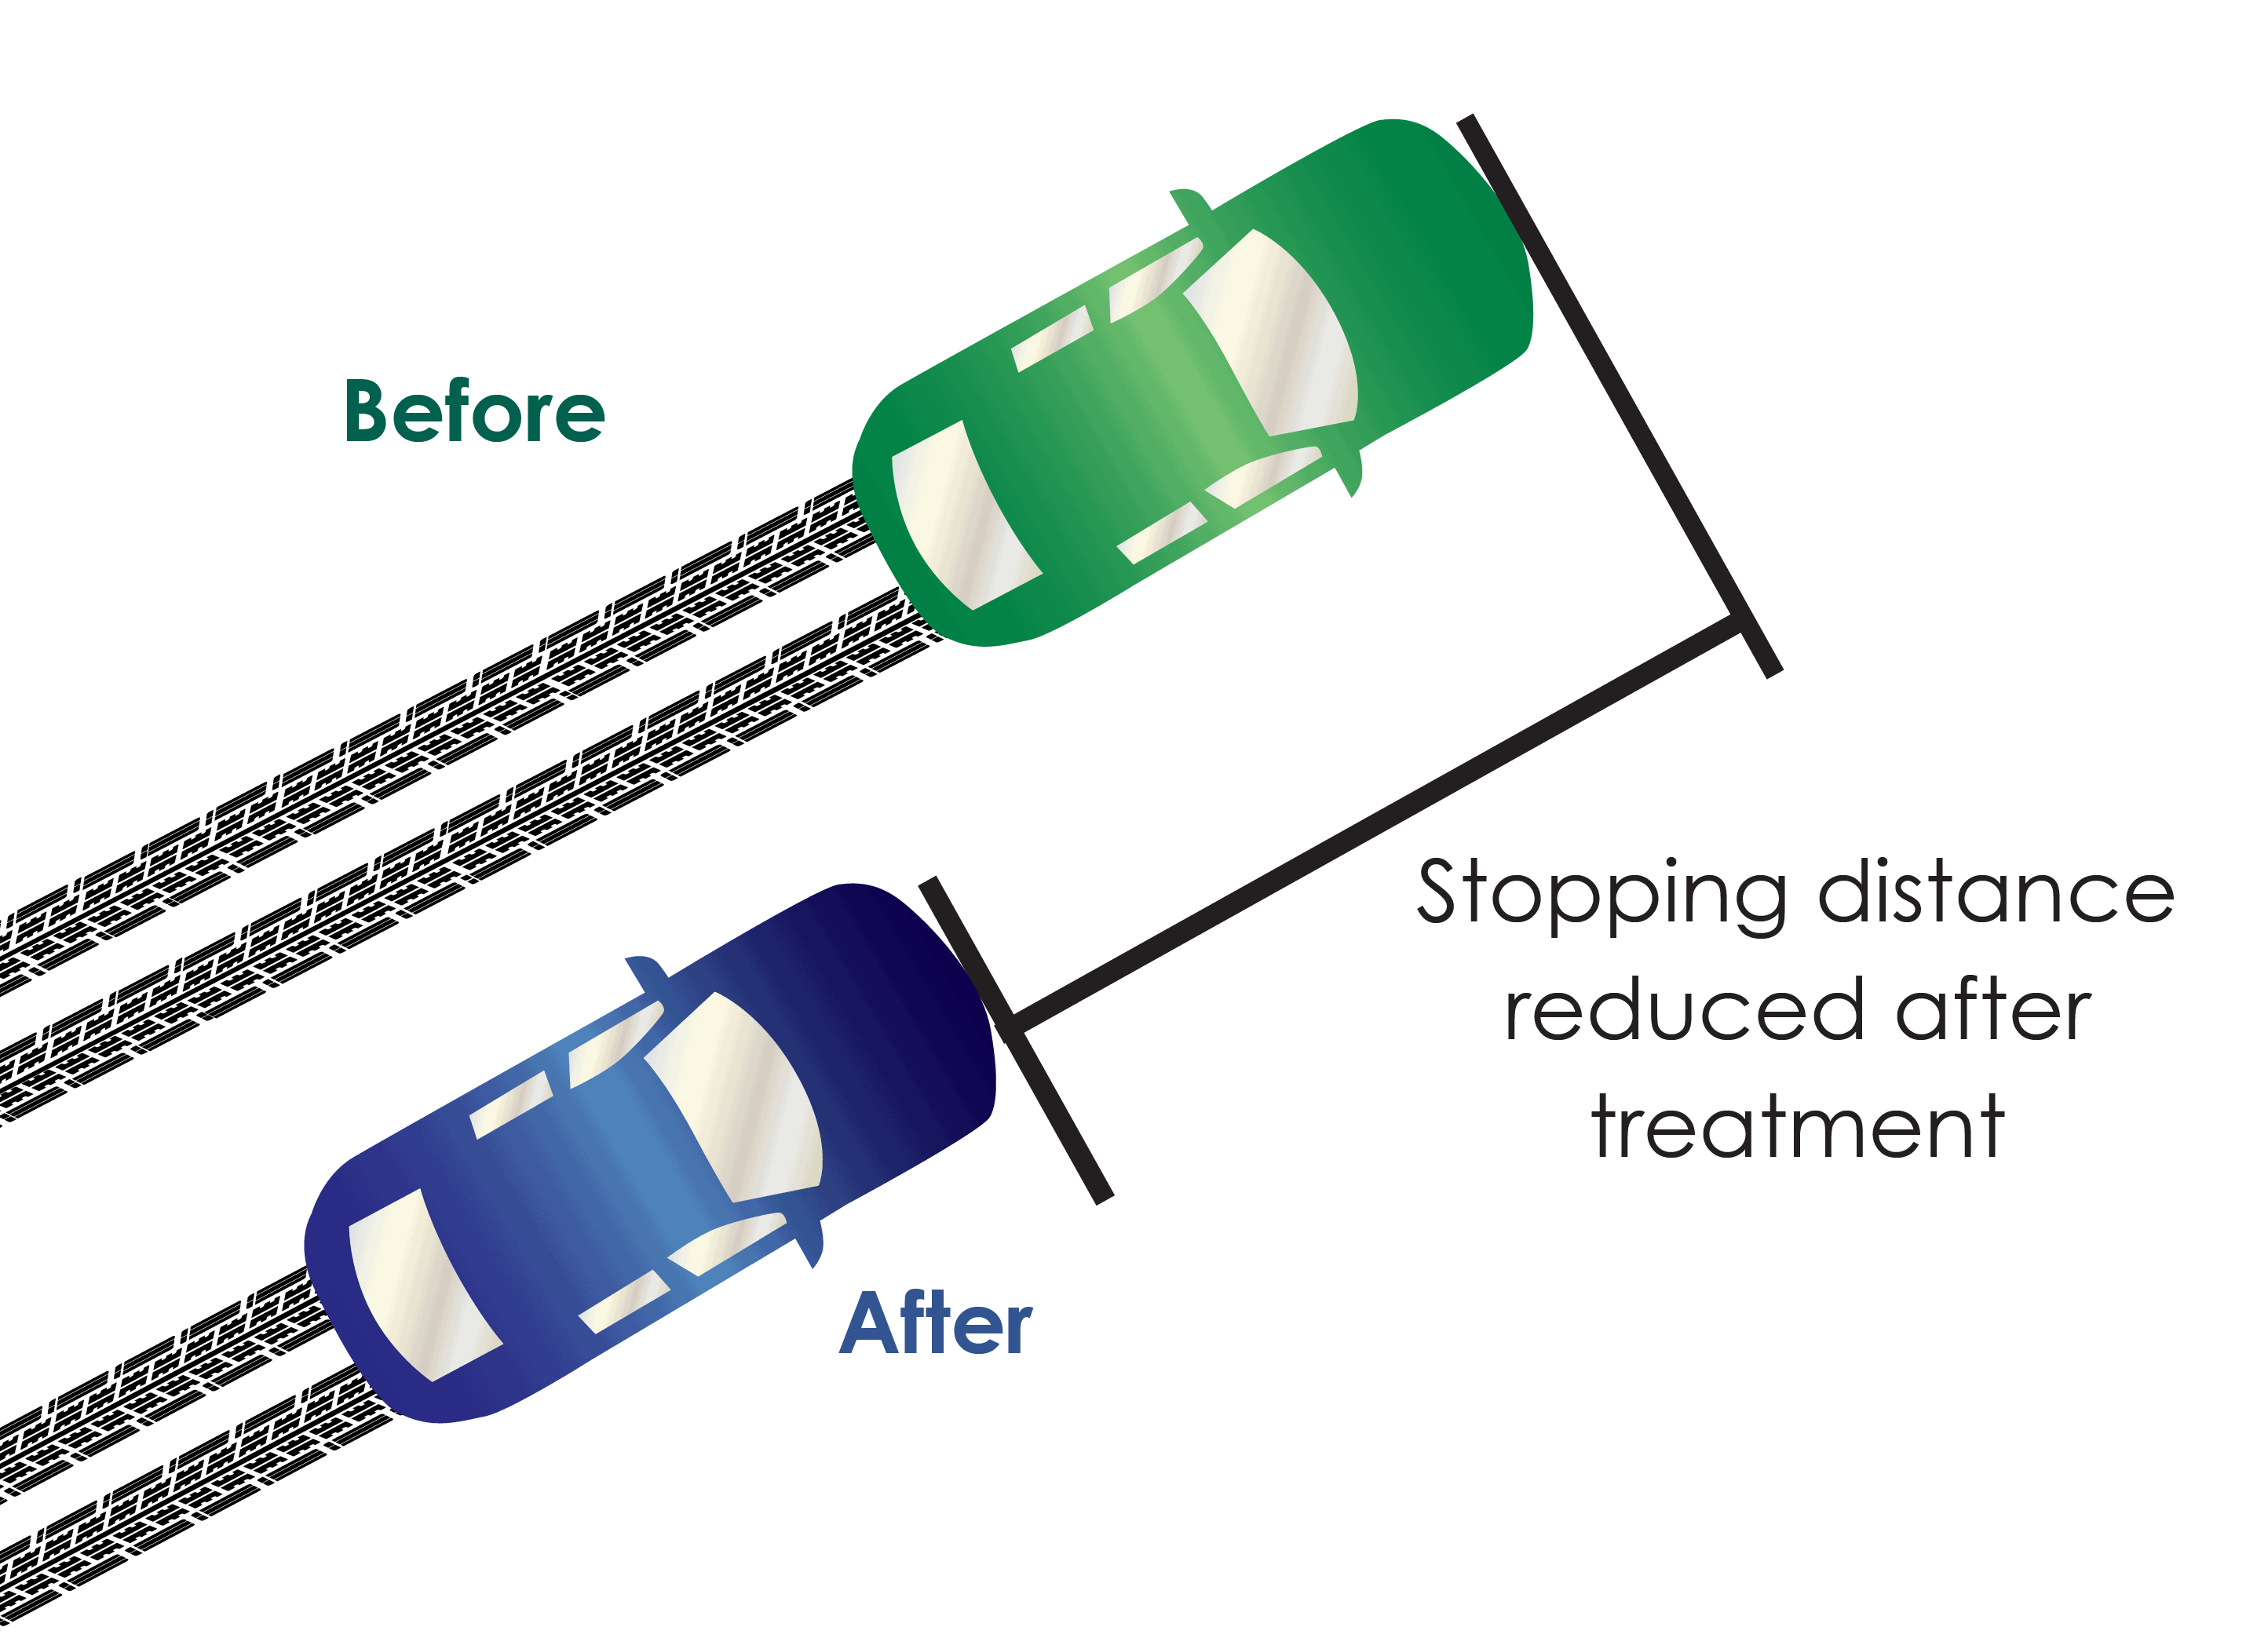 A green car passes over pedestrian area labeled as 'Before' and a blue car that has stopped before the crossing labeled as 'After'.